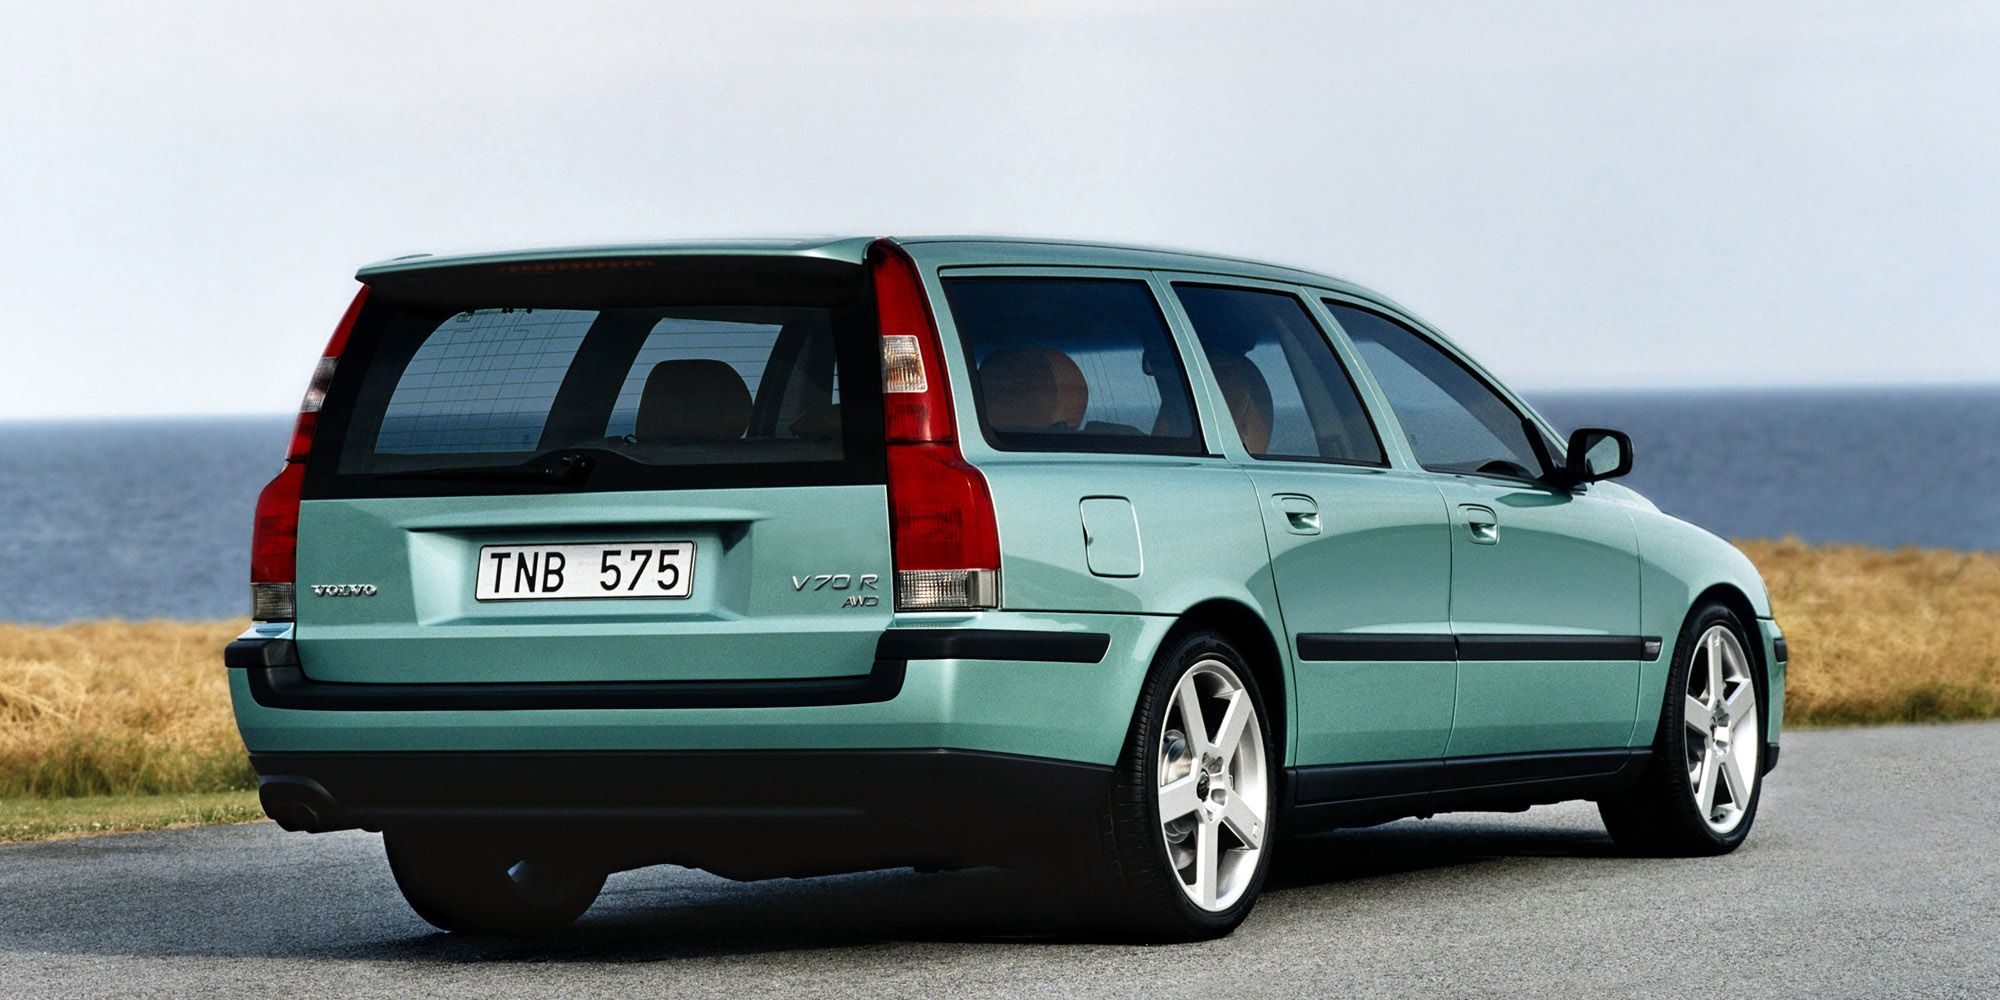 The rear of the V70 R